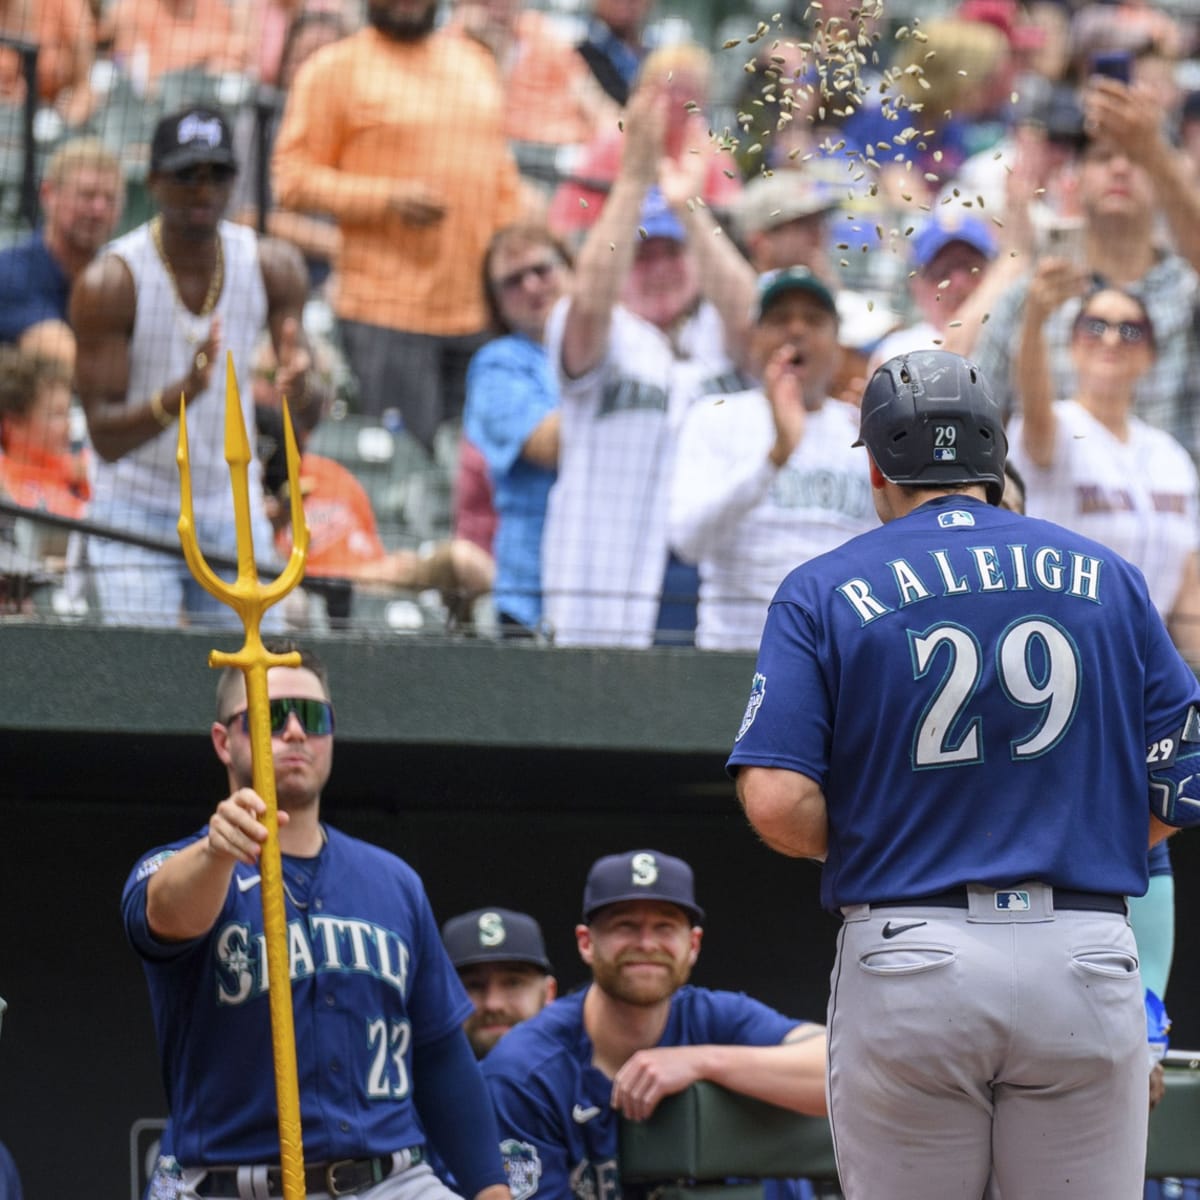 Mariners Fans think Cal Raleigh will have an OPS of 125+ or better